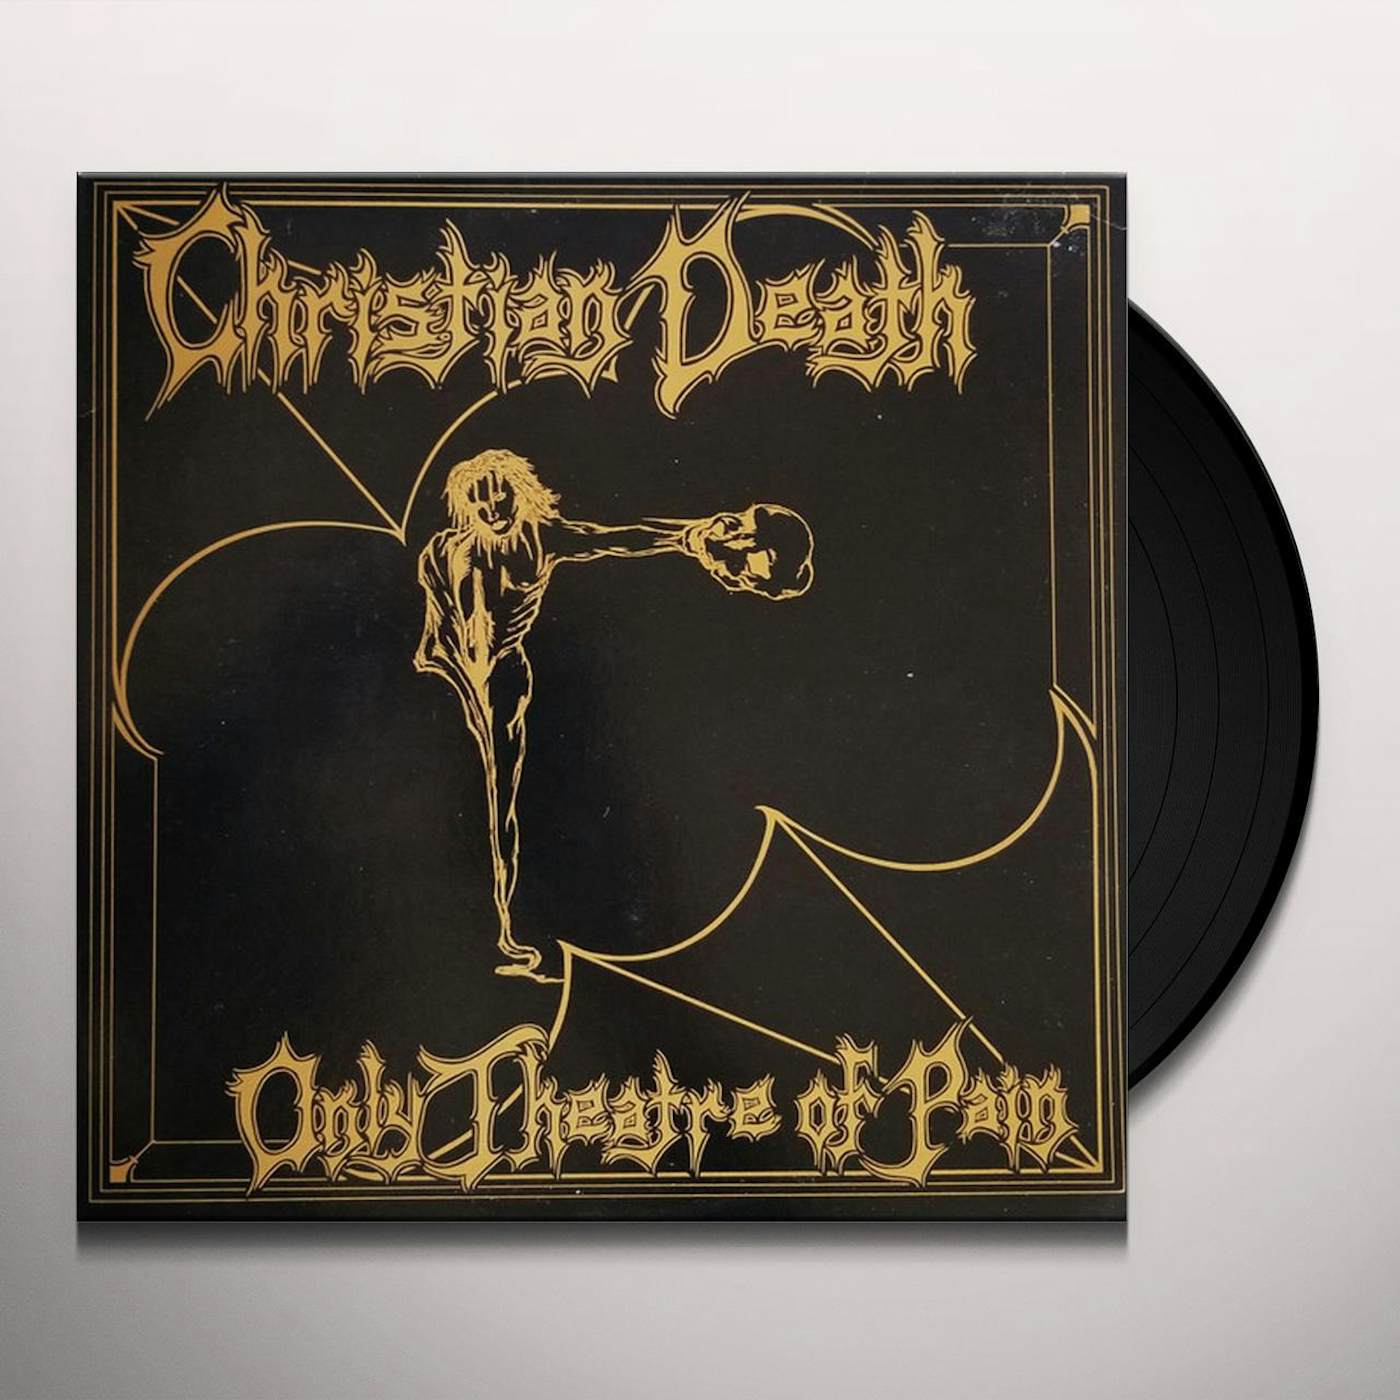 Christian Death Only Theatre of Pain Vinyl Record